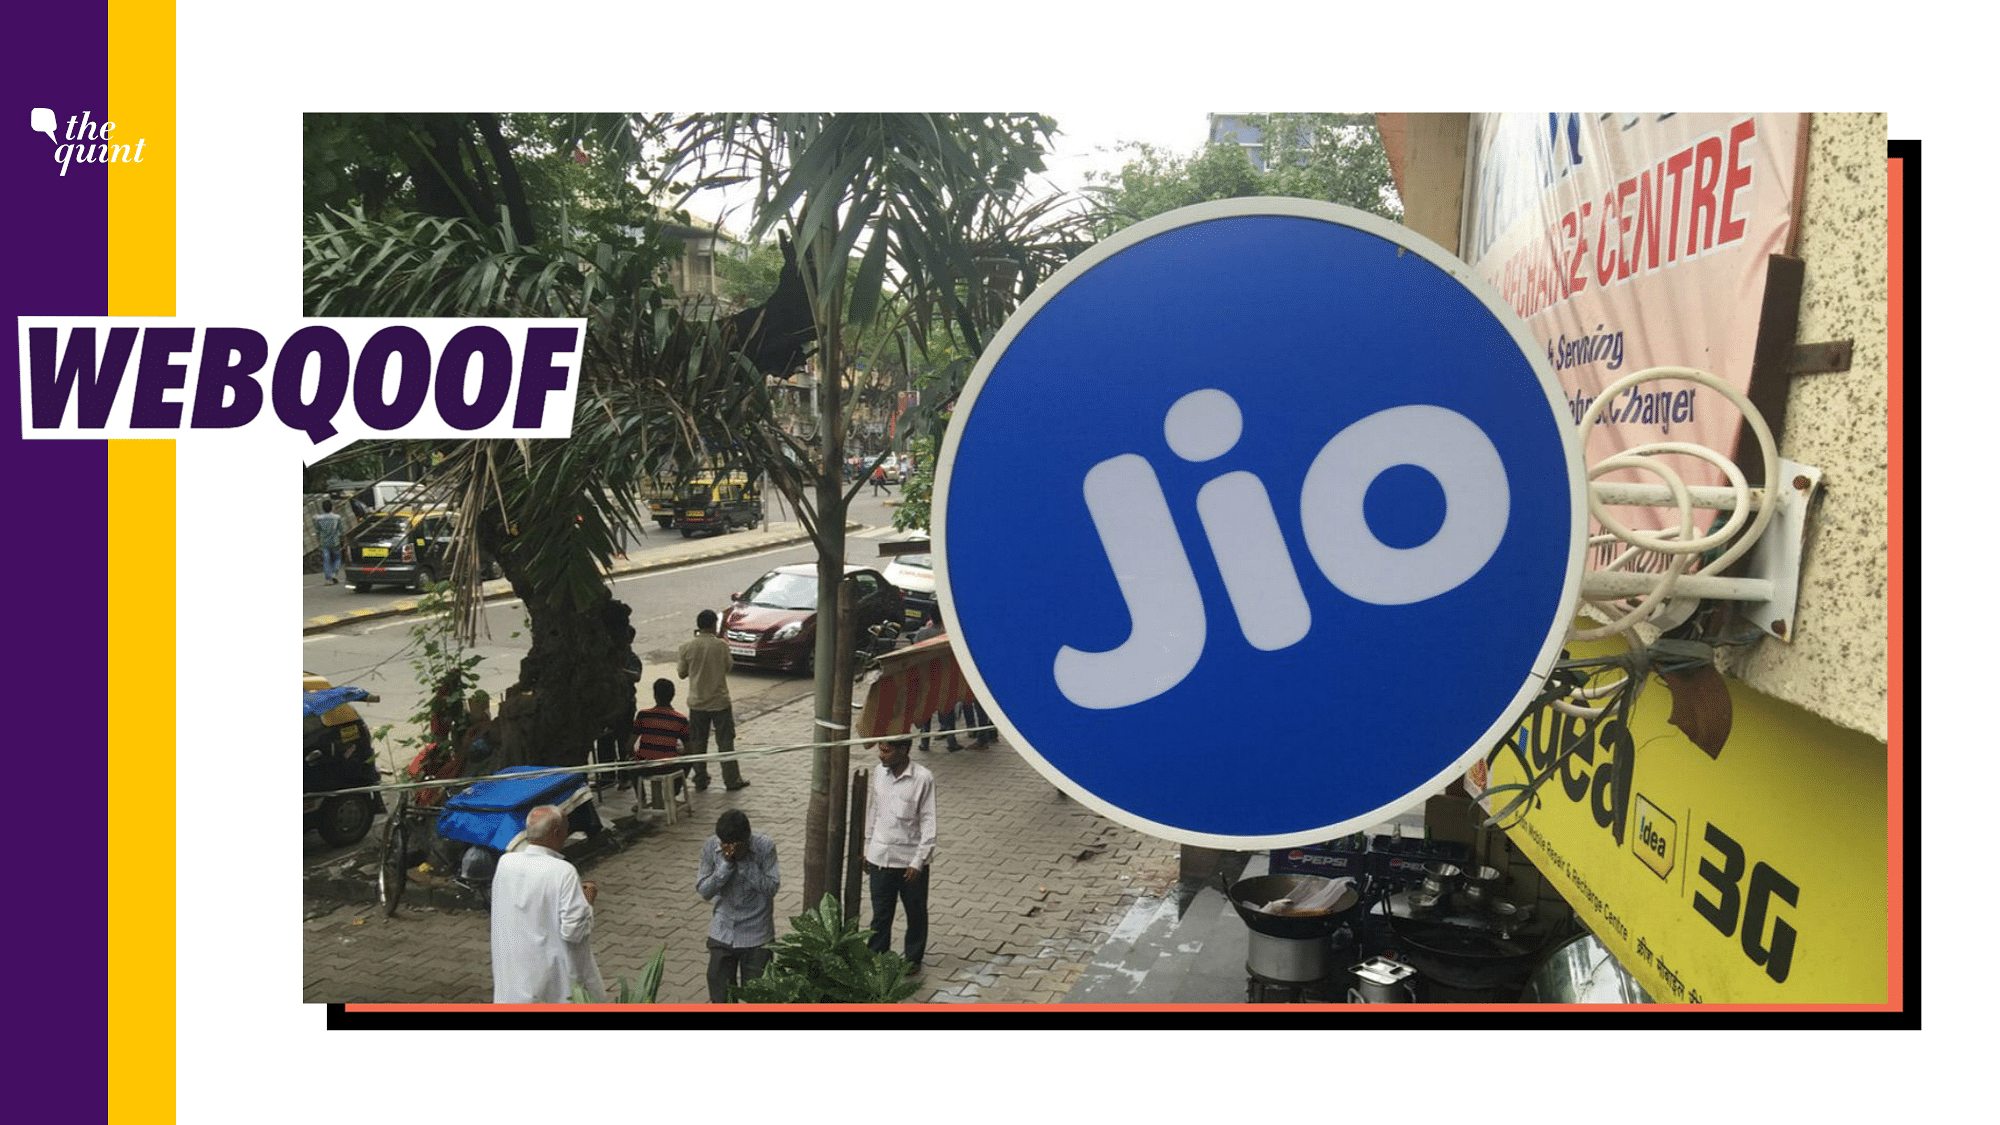 Free Reliance Jio Recharge Offer: A message claiming that Reliance Jio is offering all its Indian users a free prepaid recharge of Rs 498 has gone viral on social media.